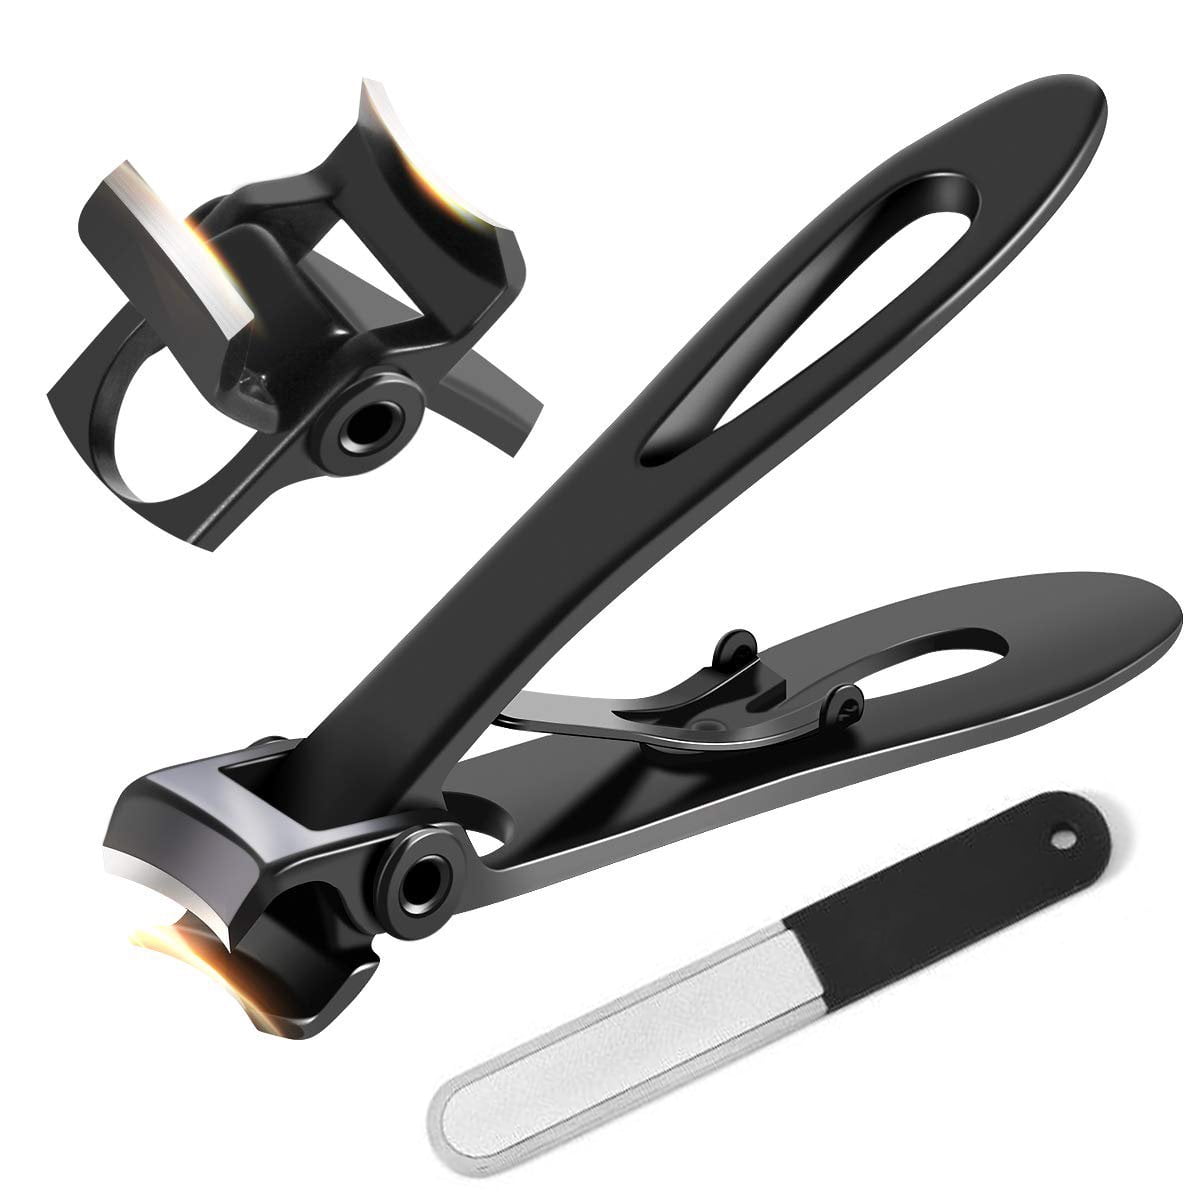 QZBON Black Nail Clippers For Thick Nails - Wide Jaw Opening